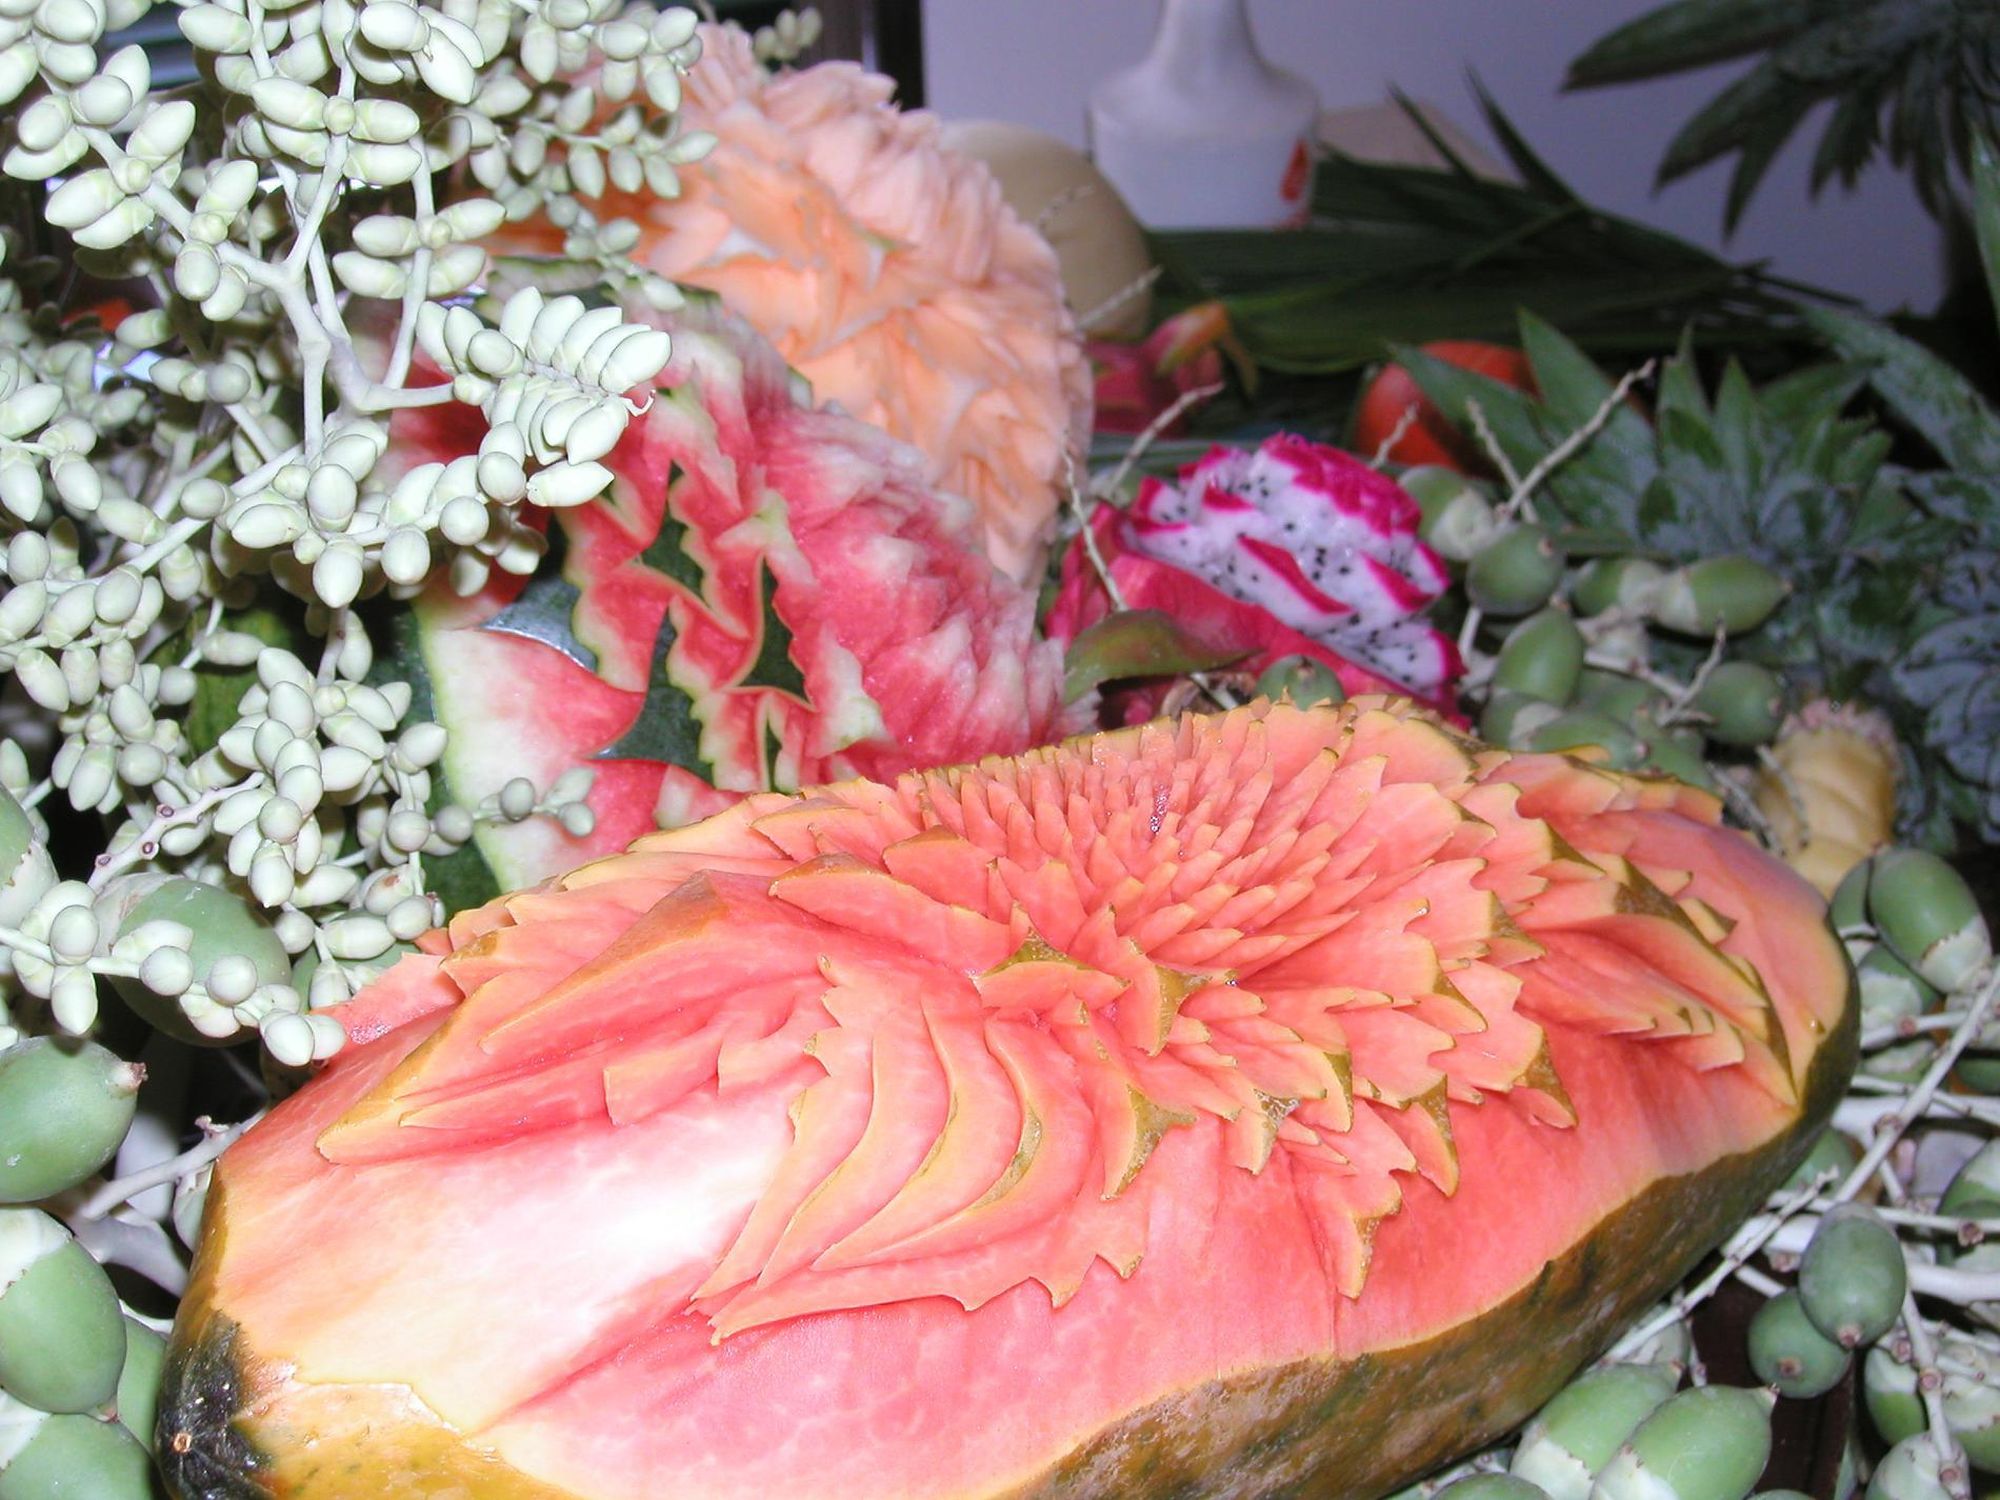 Melon and dragon fruit flowers.